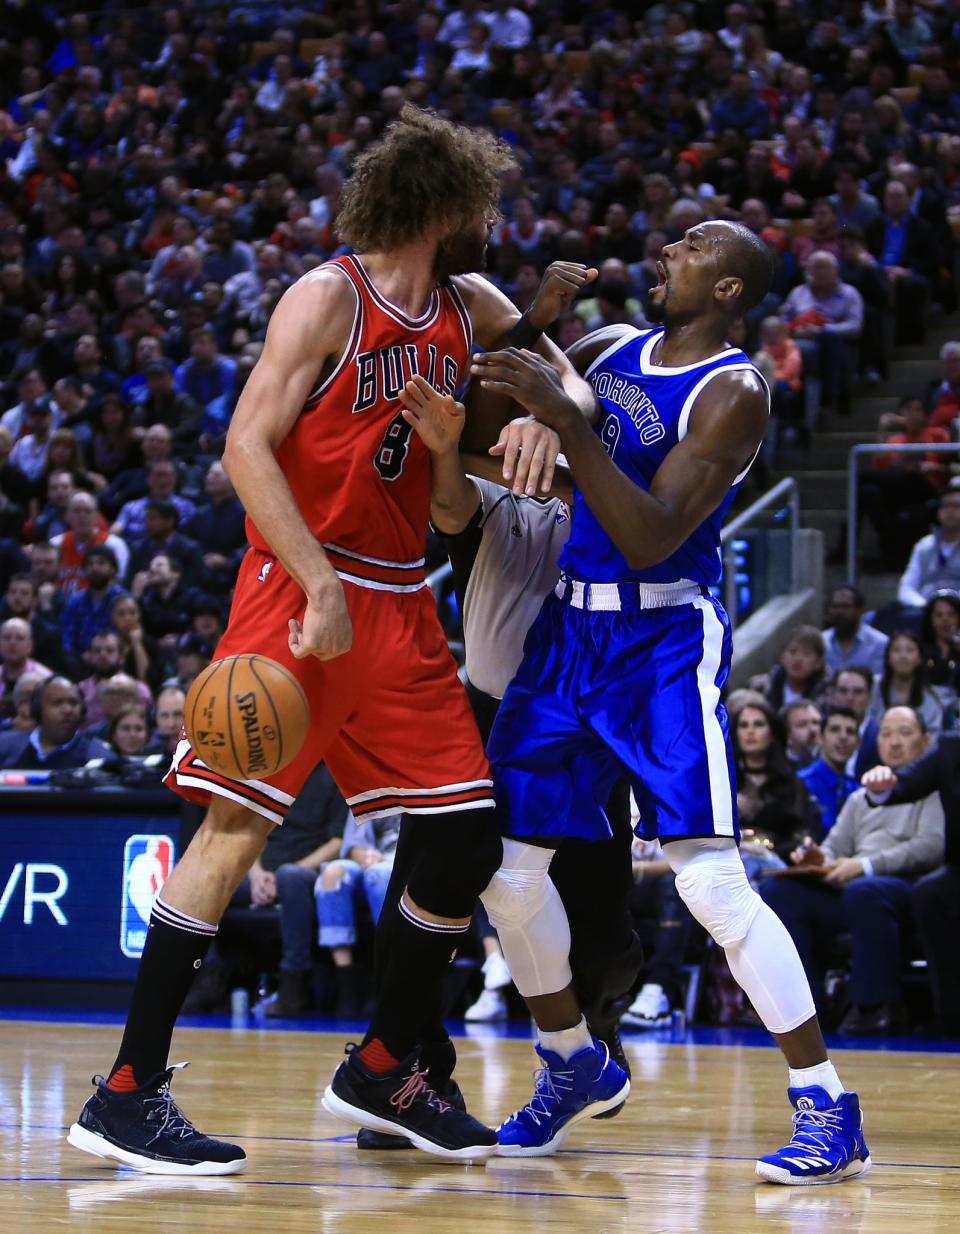 <p>Robin Lopez #8 of the Chicago Bulls fights with Serge Ibaka #9 of the Toronto Raptors during the second half of an NBA game at Air Canada Centre on March 21, 2017 in Toronto, Canada. NOTE TO USER: User expressly acknowledges and agrees that, by downloading and or using this photograph, User is consenting to the terms and conditions of the Getty Images License Agreement. (Photo by Vaughn Ridley/Getty Images) </p>